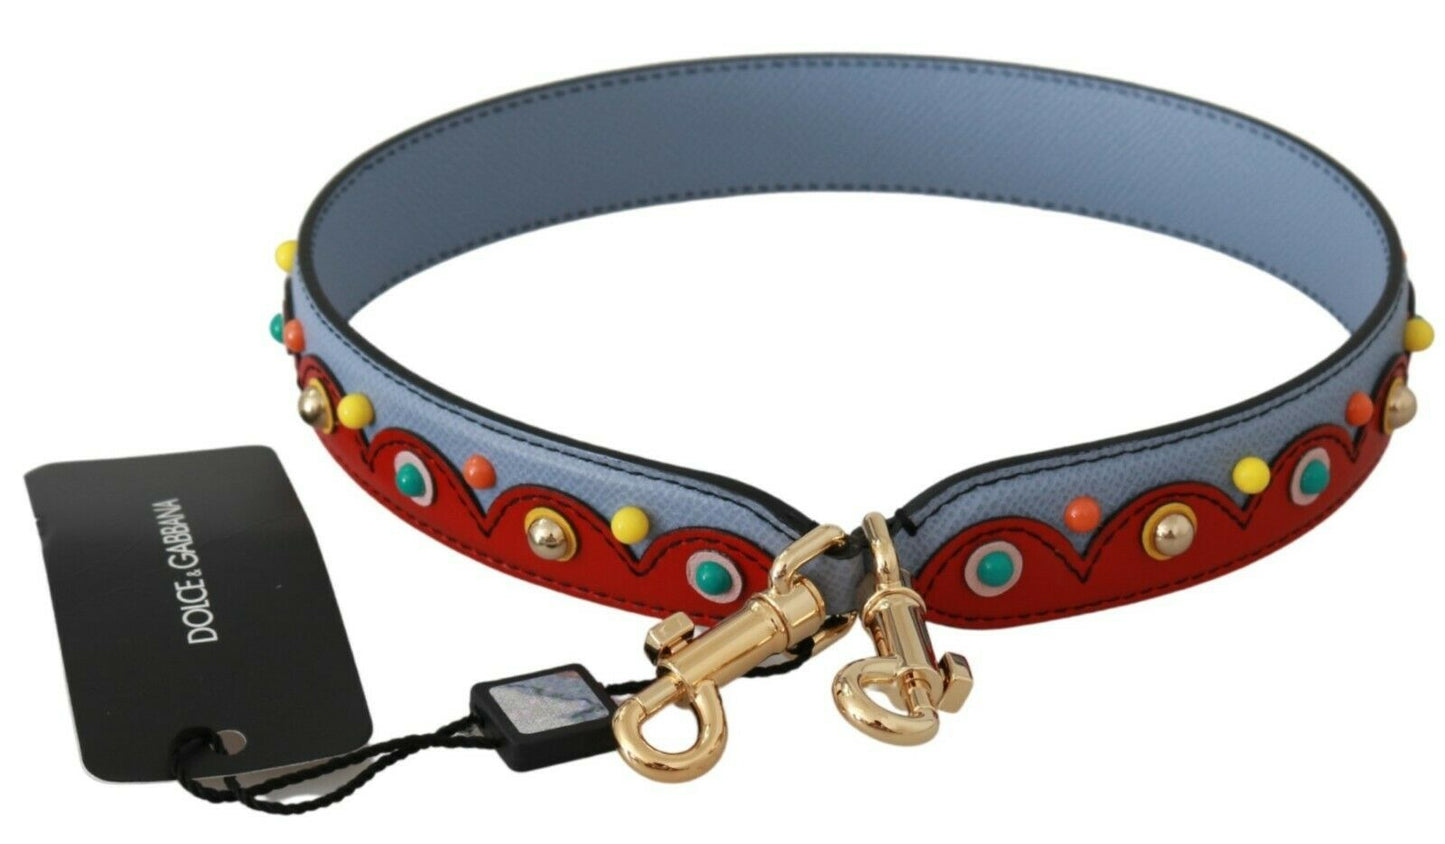 Dolce & Gabbana Blue and red Shoulder Strap Leather Blue Handbag Accessory - Gio Beverly Hills